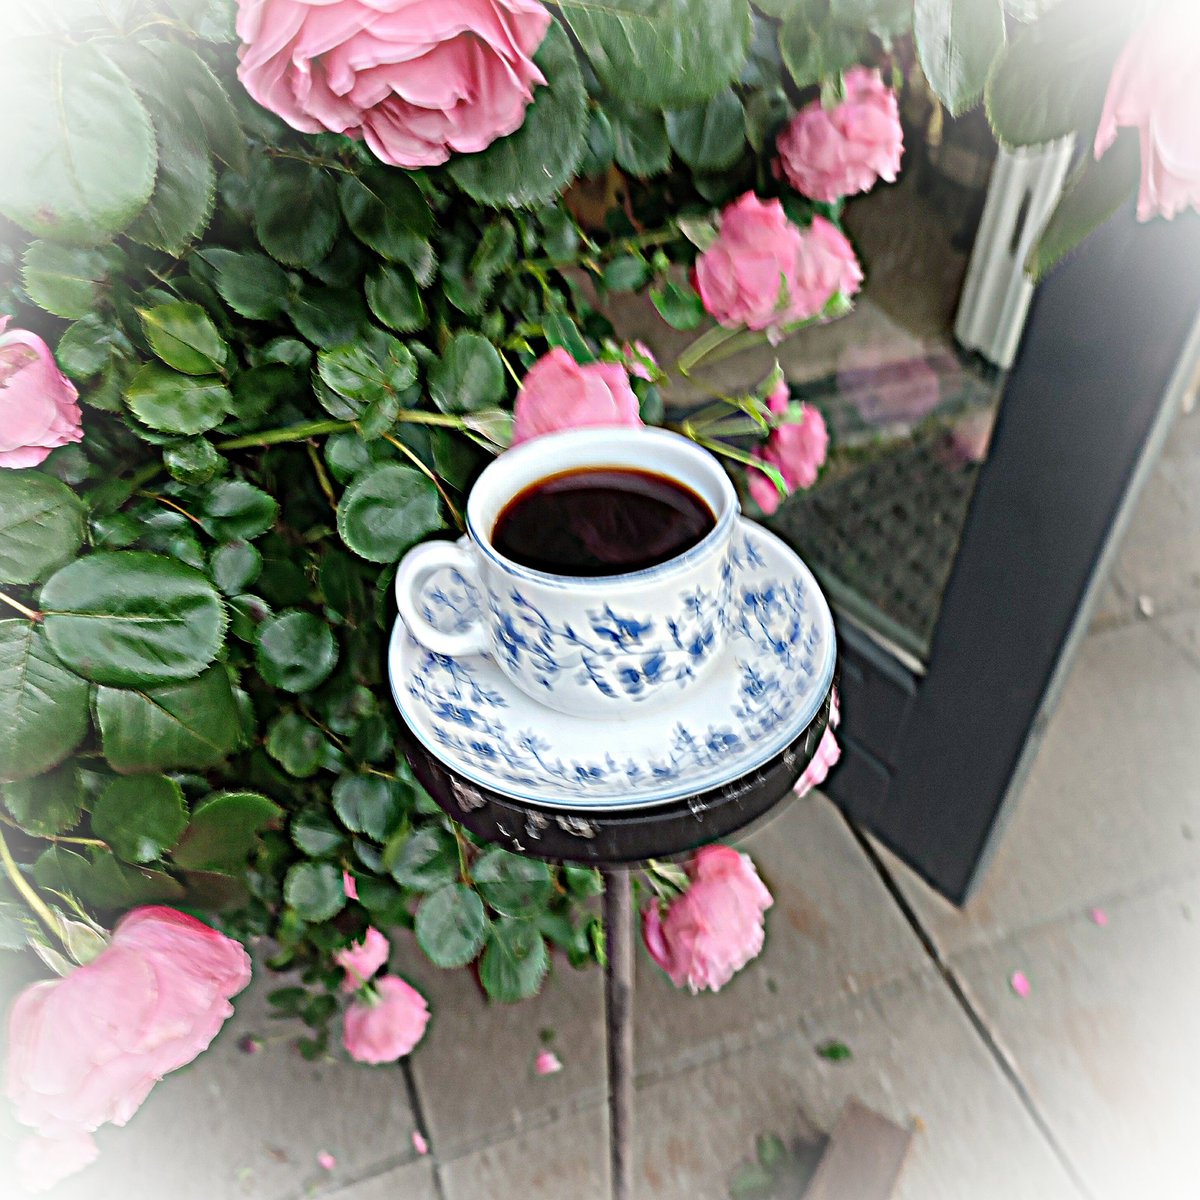 @strategywoman Morning, dear Yara! Glad to hear you are well and already had #warcoffee . I hope that the time when you freely can choose coffee and reading, but books are always good friends. With love from Utrecht 🌷💖🇺🇦